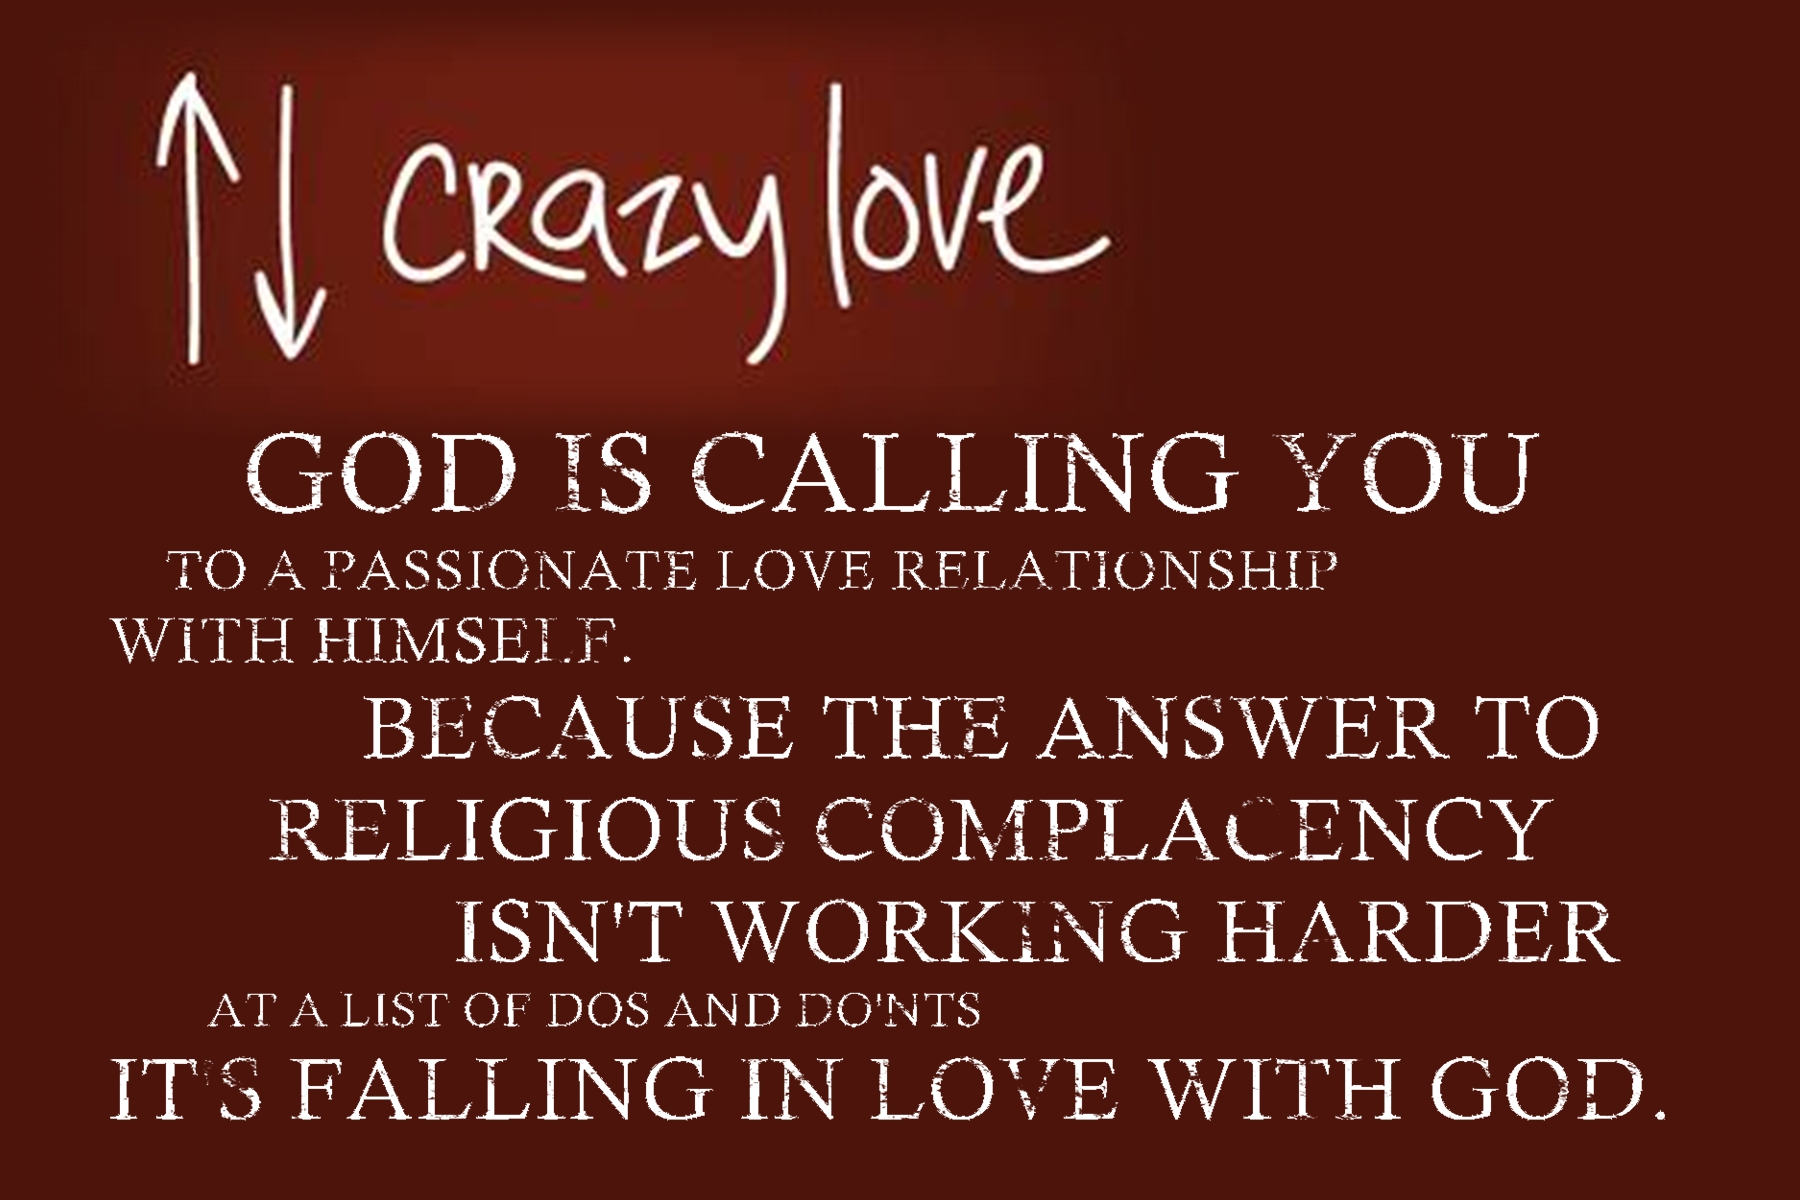 Francis Chan Crazy Love Quotes. QuotesGram